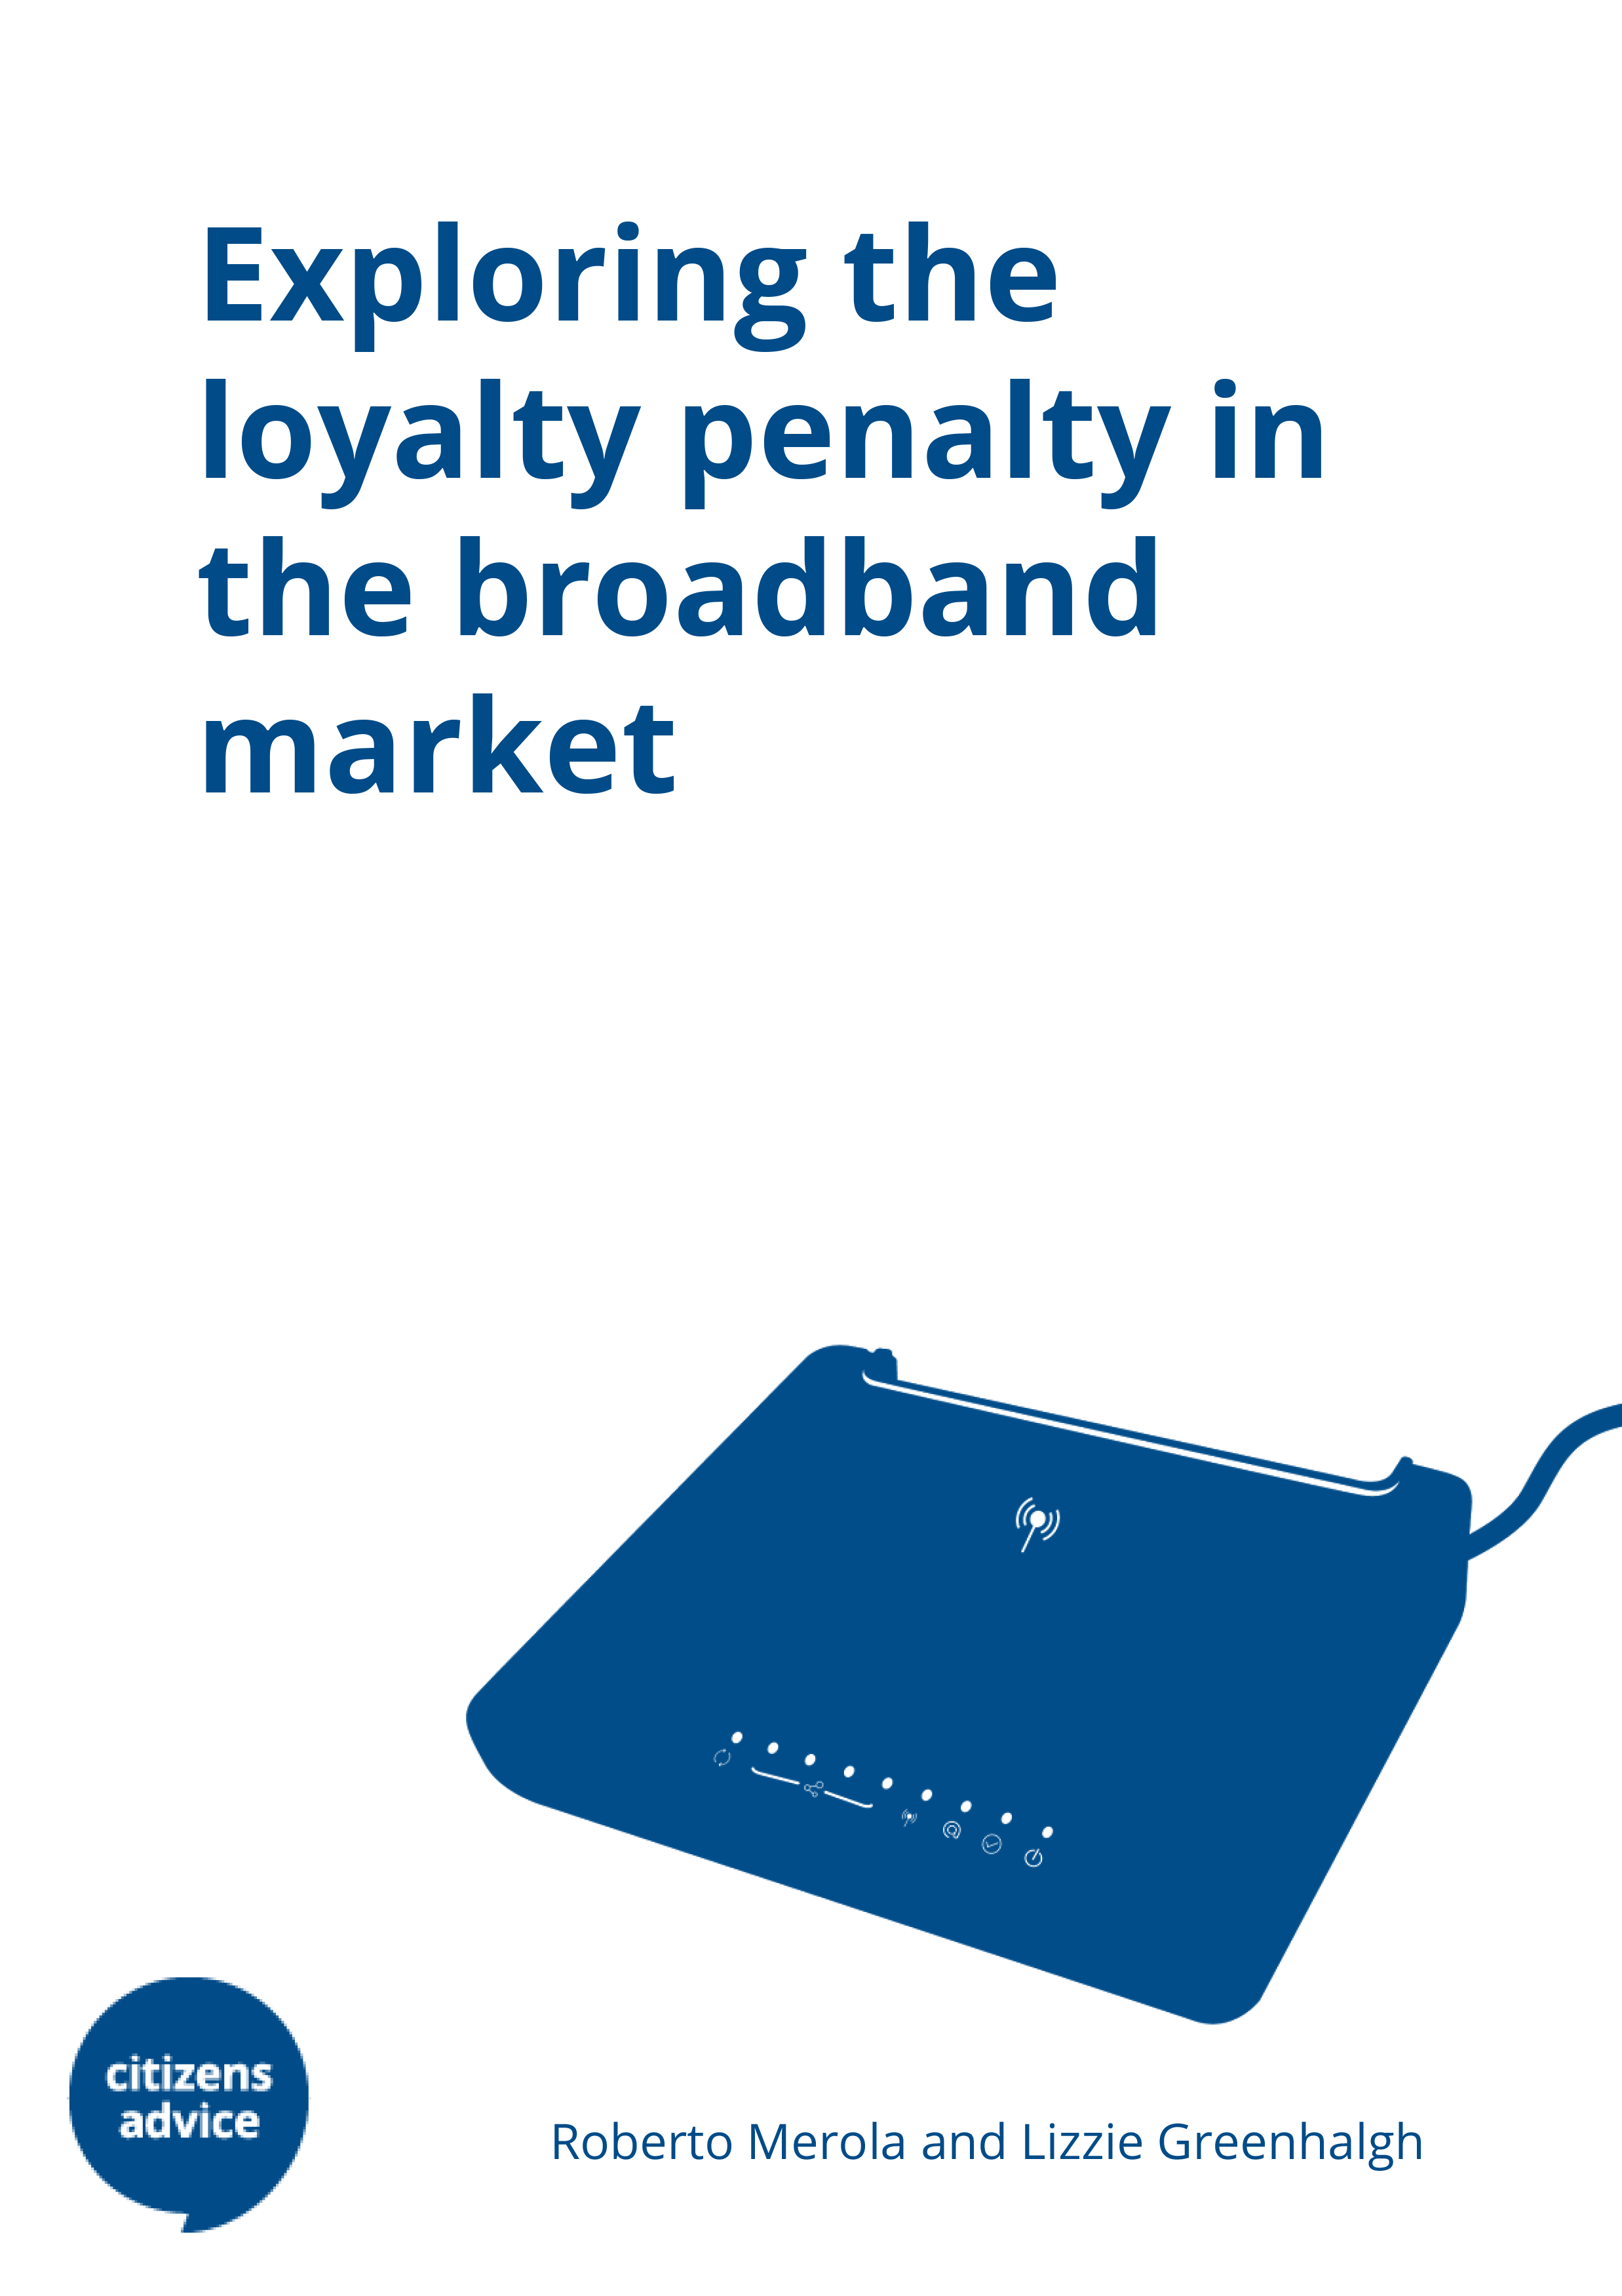 Exploring the loyalty penalty in the broadband market